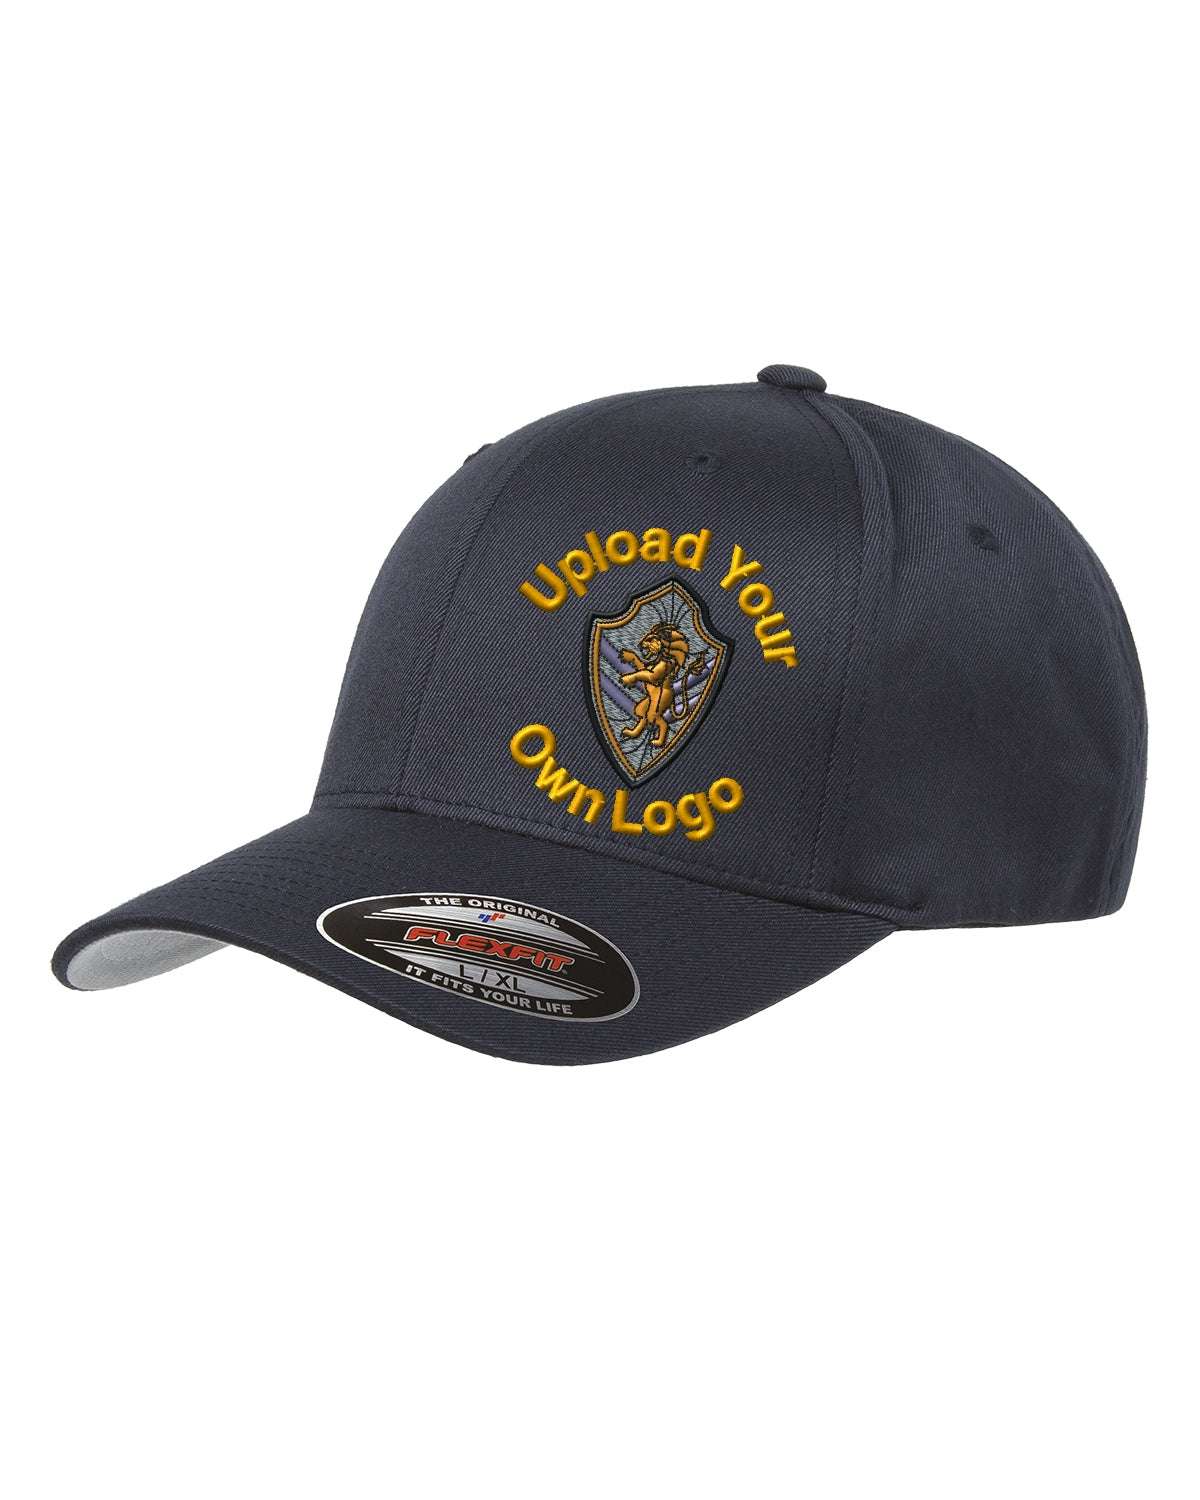 Flex Fitted Ball Cap with Your Company Logo Embroidered - navy